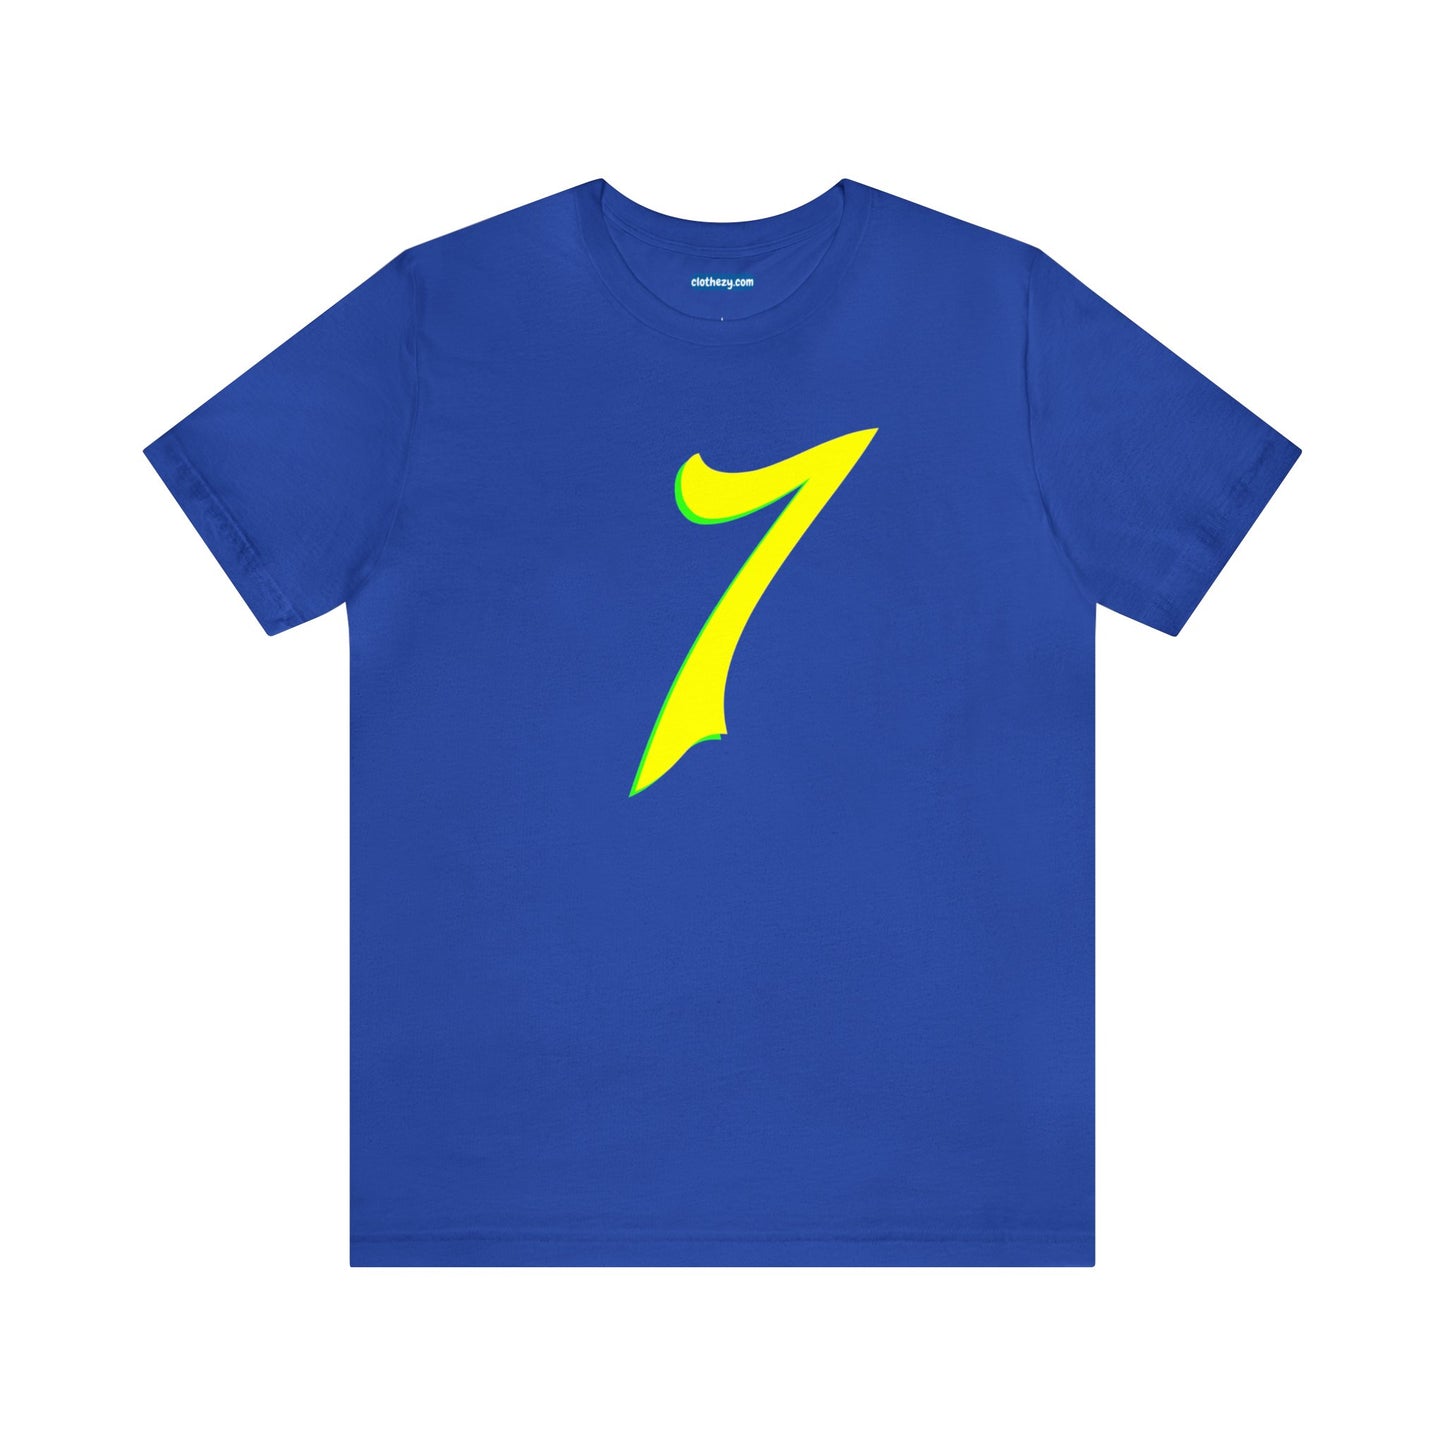 Number 7 Design - Soft Cotton Tee for birthdays and celebrations, Gift for friends and family, Multiple Options by clothezy.com in Royal Blue Size Small - Buy Now